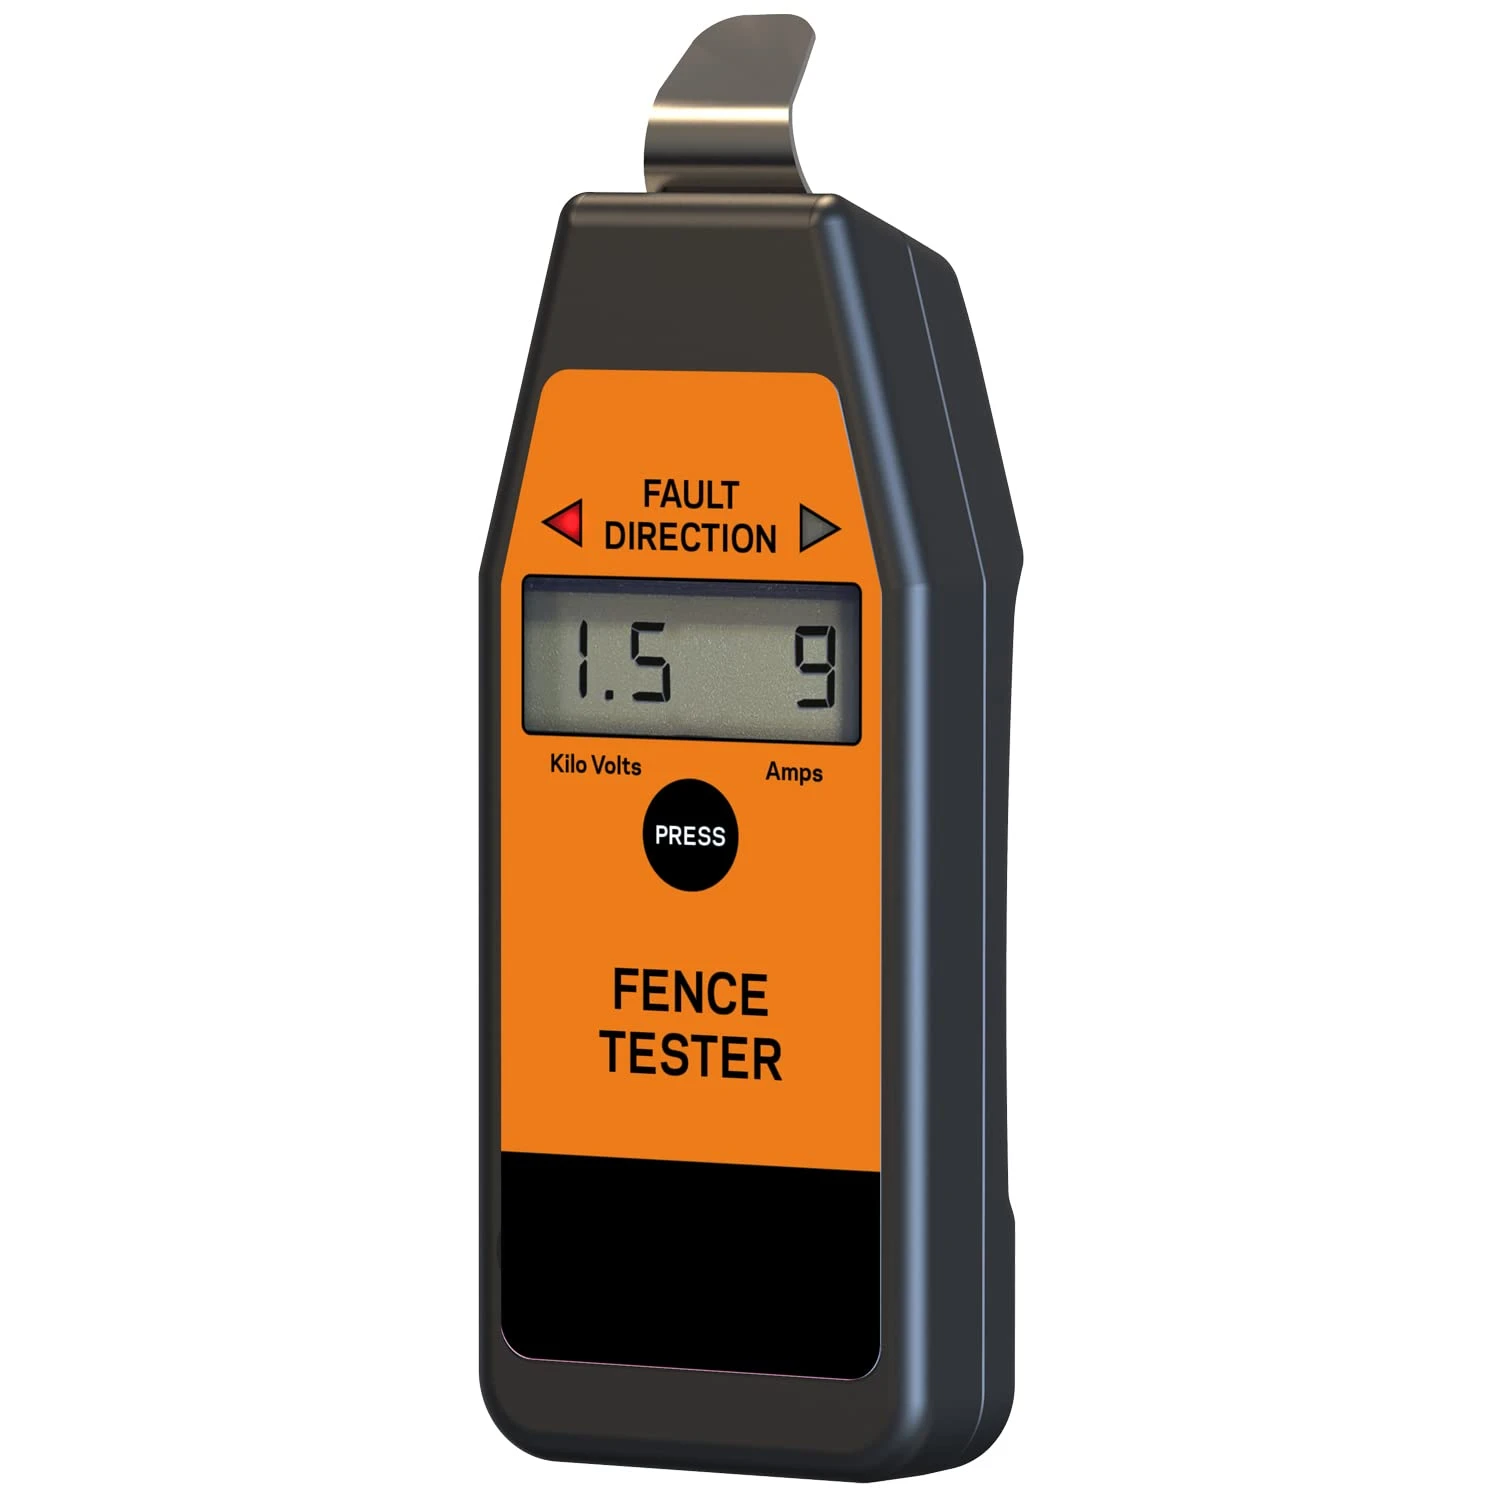 

Tester | Identify & Locate Fence Faults | Tough Water & Resistant Pocket Size Digital Reader | 3-in-1 Device (Volt Met